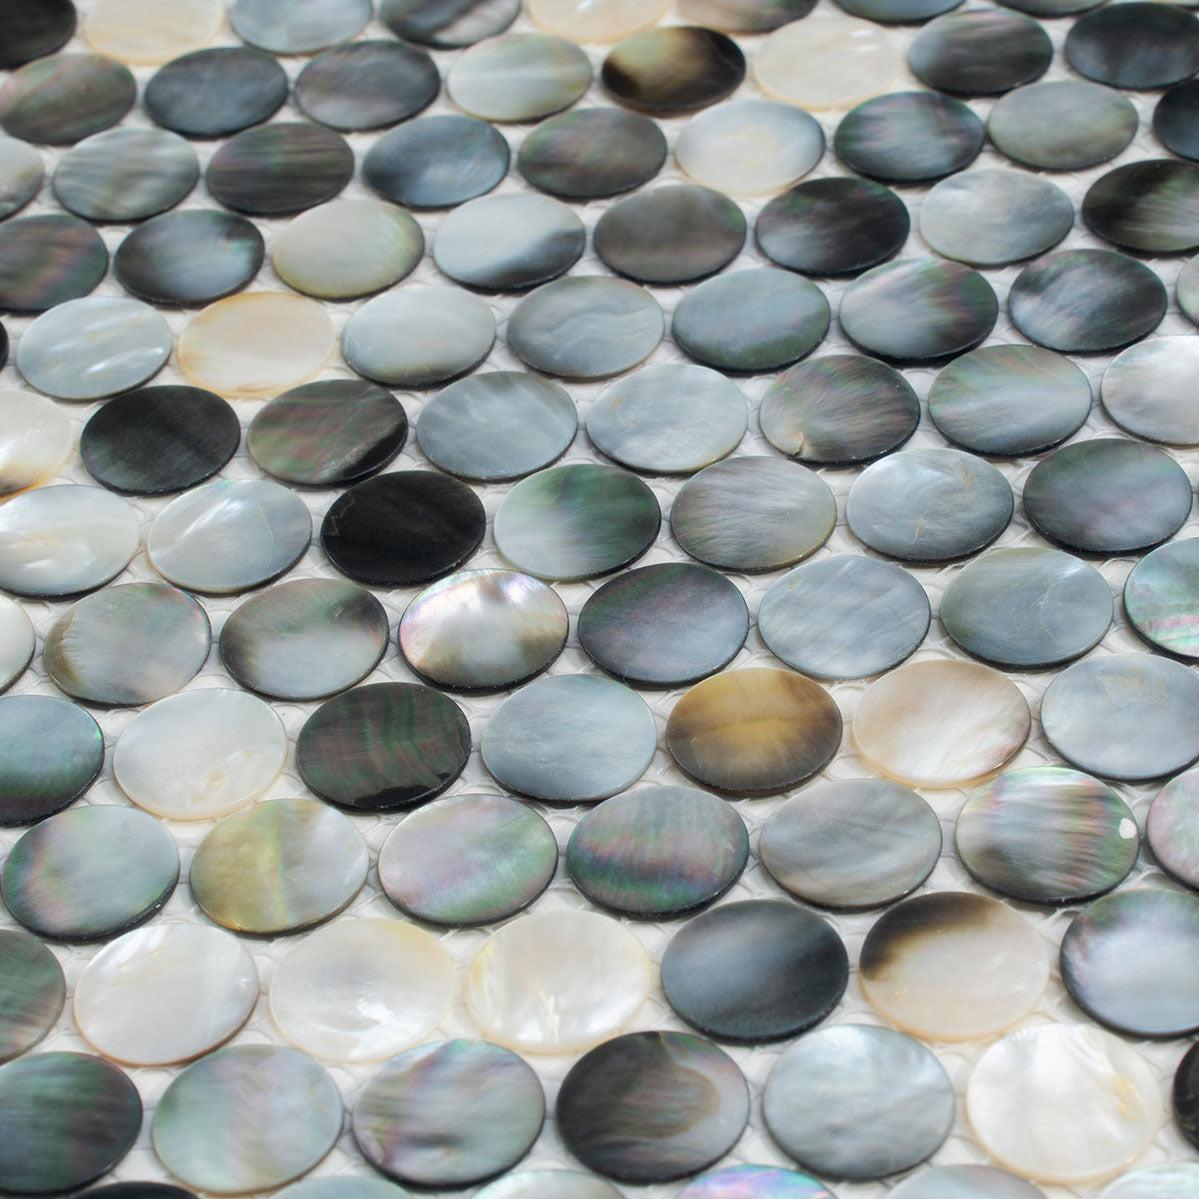 Mother Of Pearl Deep Sea Penny Rounds Mosaic Tile